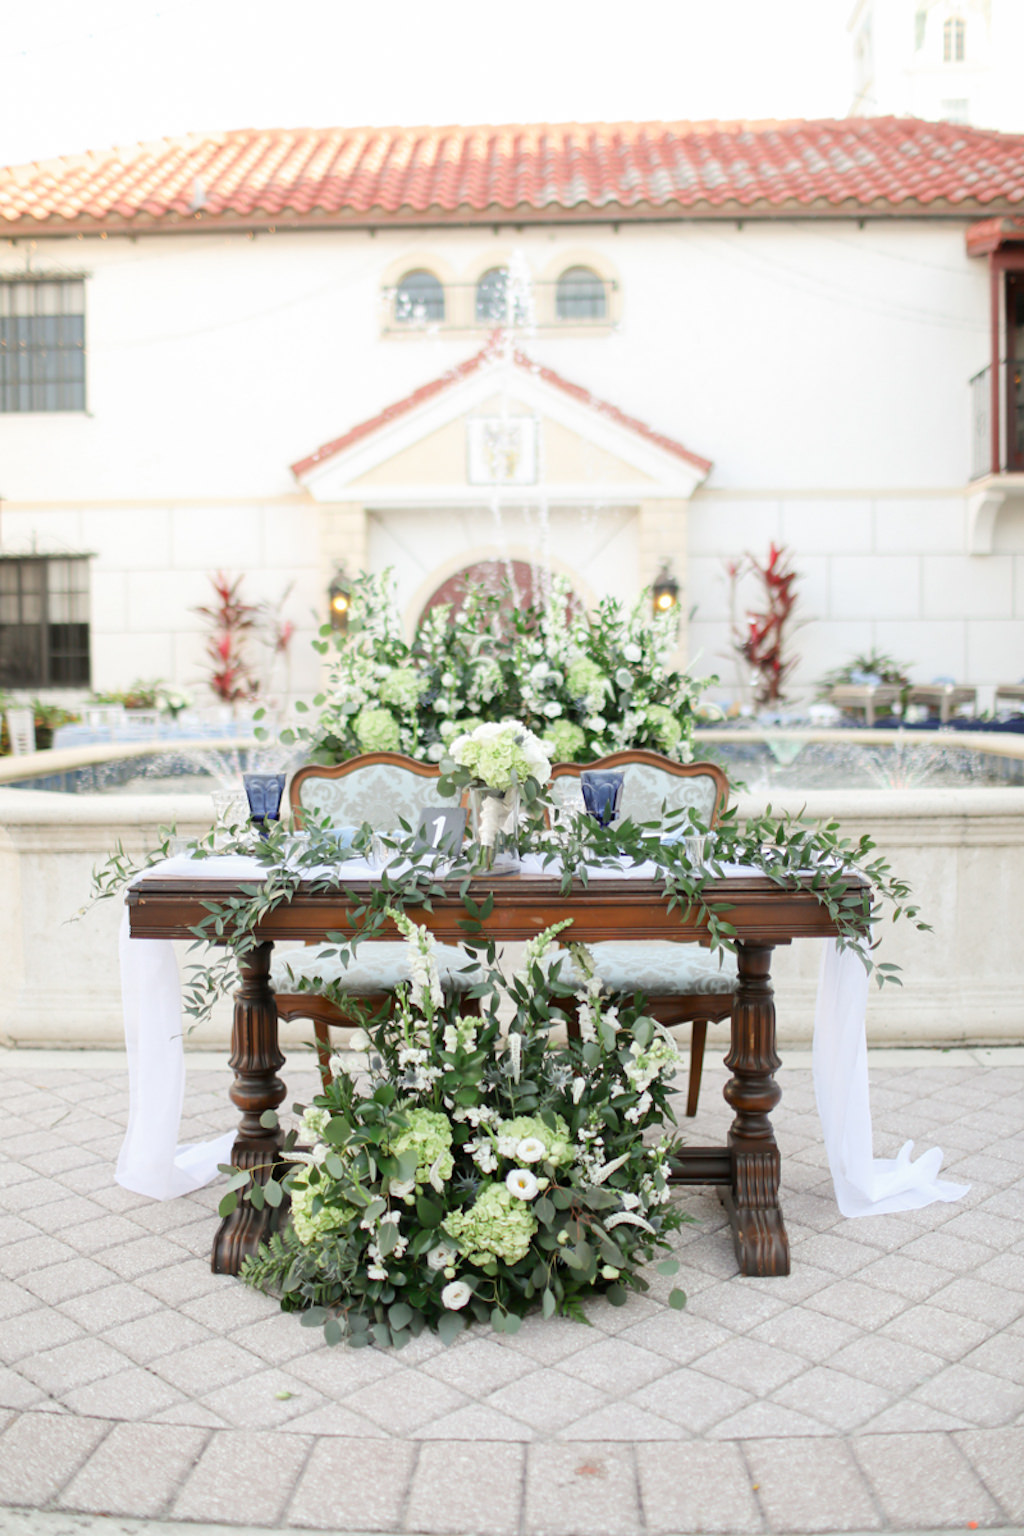 Rustic Elegant Wedding Reception Decor, Wooden Sweetheart Table with White Table Runner, Greenery, White, Ivory Floral Arrangements and Centerpiece | Wedding Photographer Lifelong Photography Studios | Wedding Venue Bishop Museum of Science and Nature | Sarasota Wedding Planner Kelly Kennedy Weddings and Events